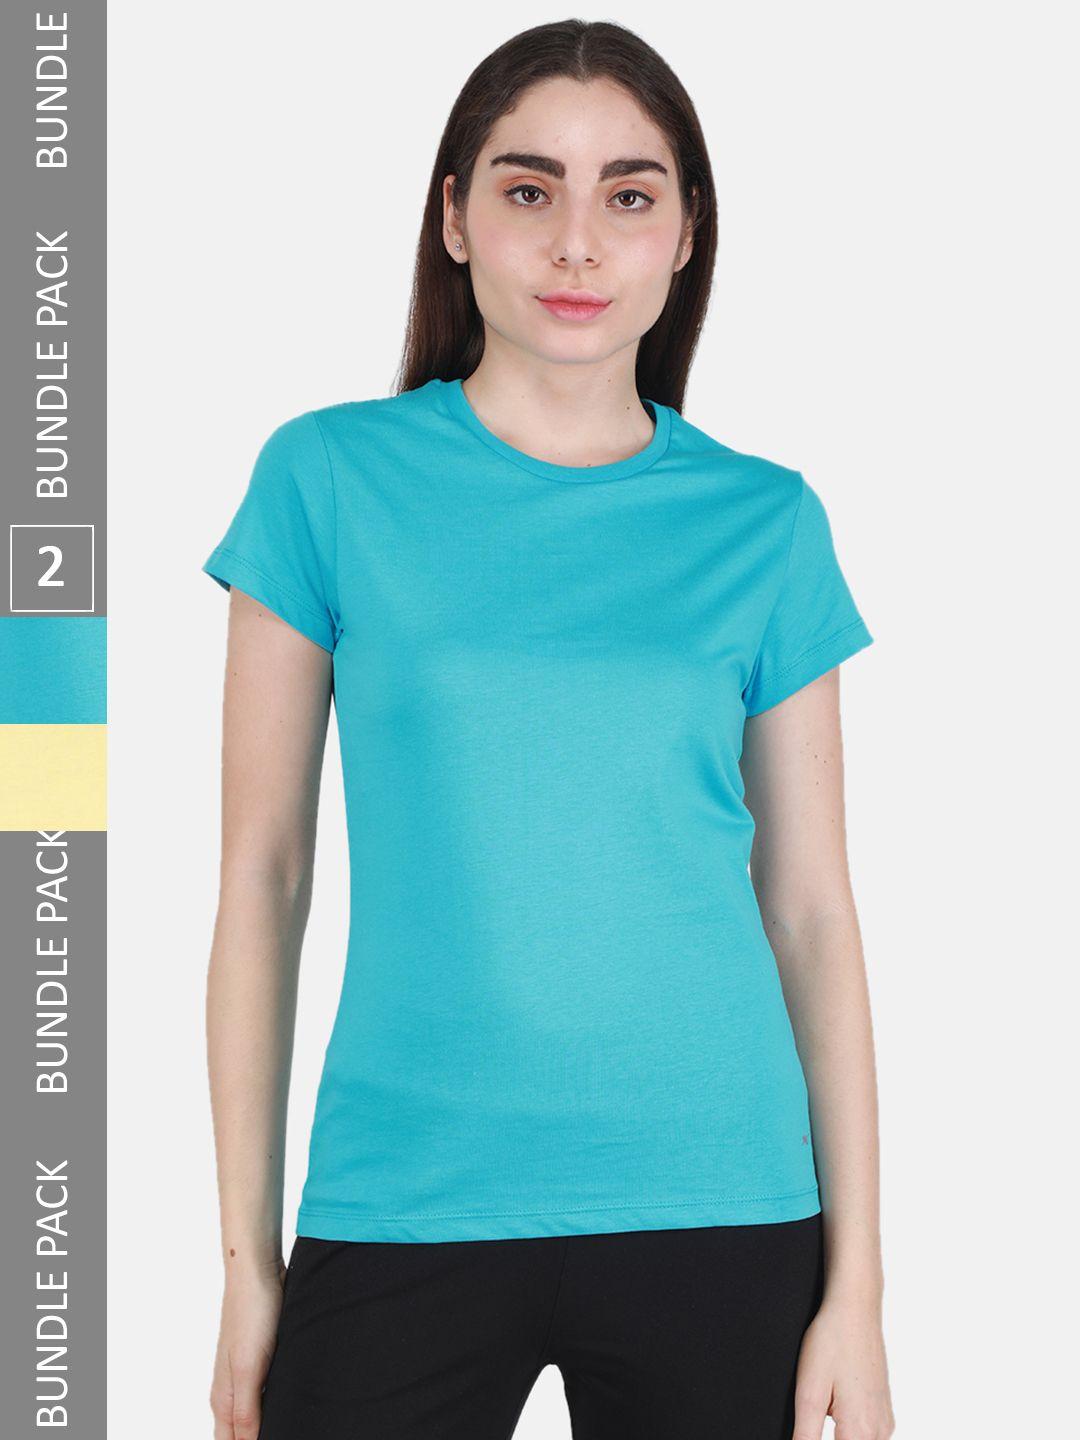 monte-carlo-women-pack-of-2-cotton-round-neck-tops